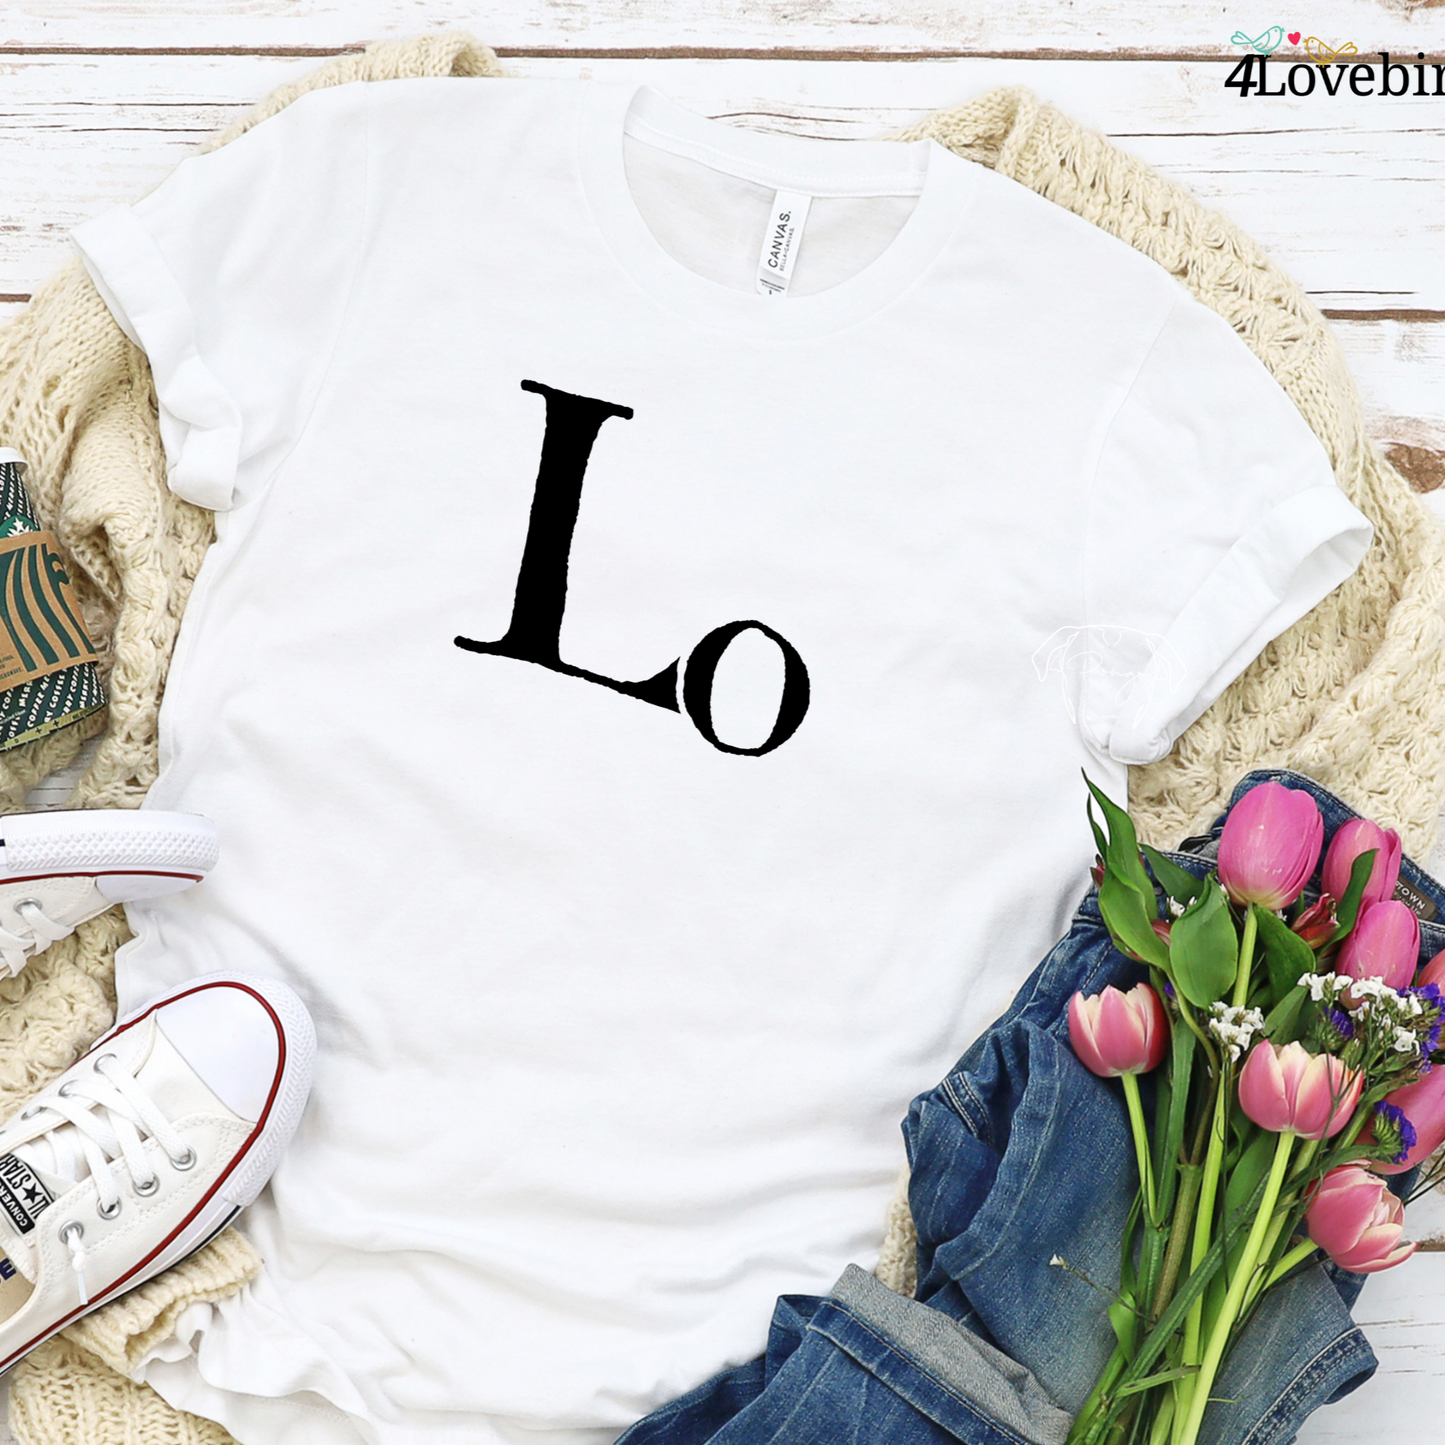 LO VE Valentine's Day Humorous Love Matching Outfits Set for Couples - Perfect Anniversary Gift